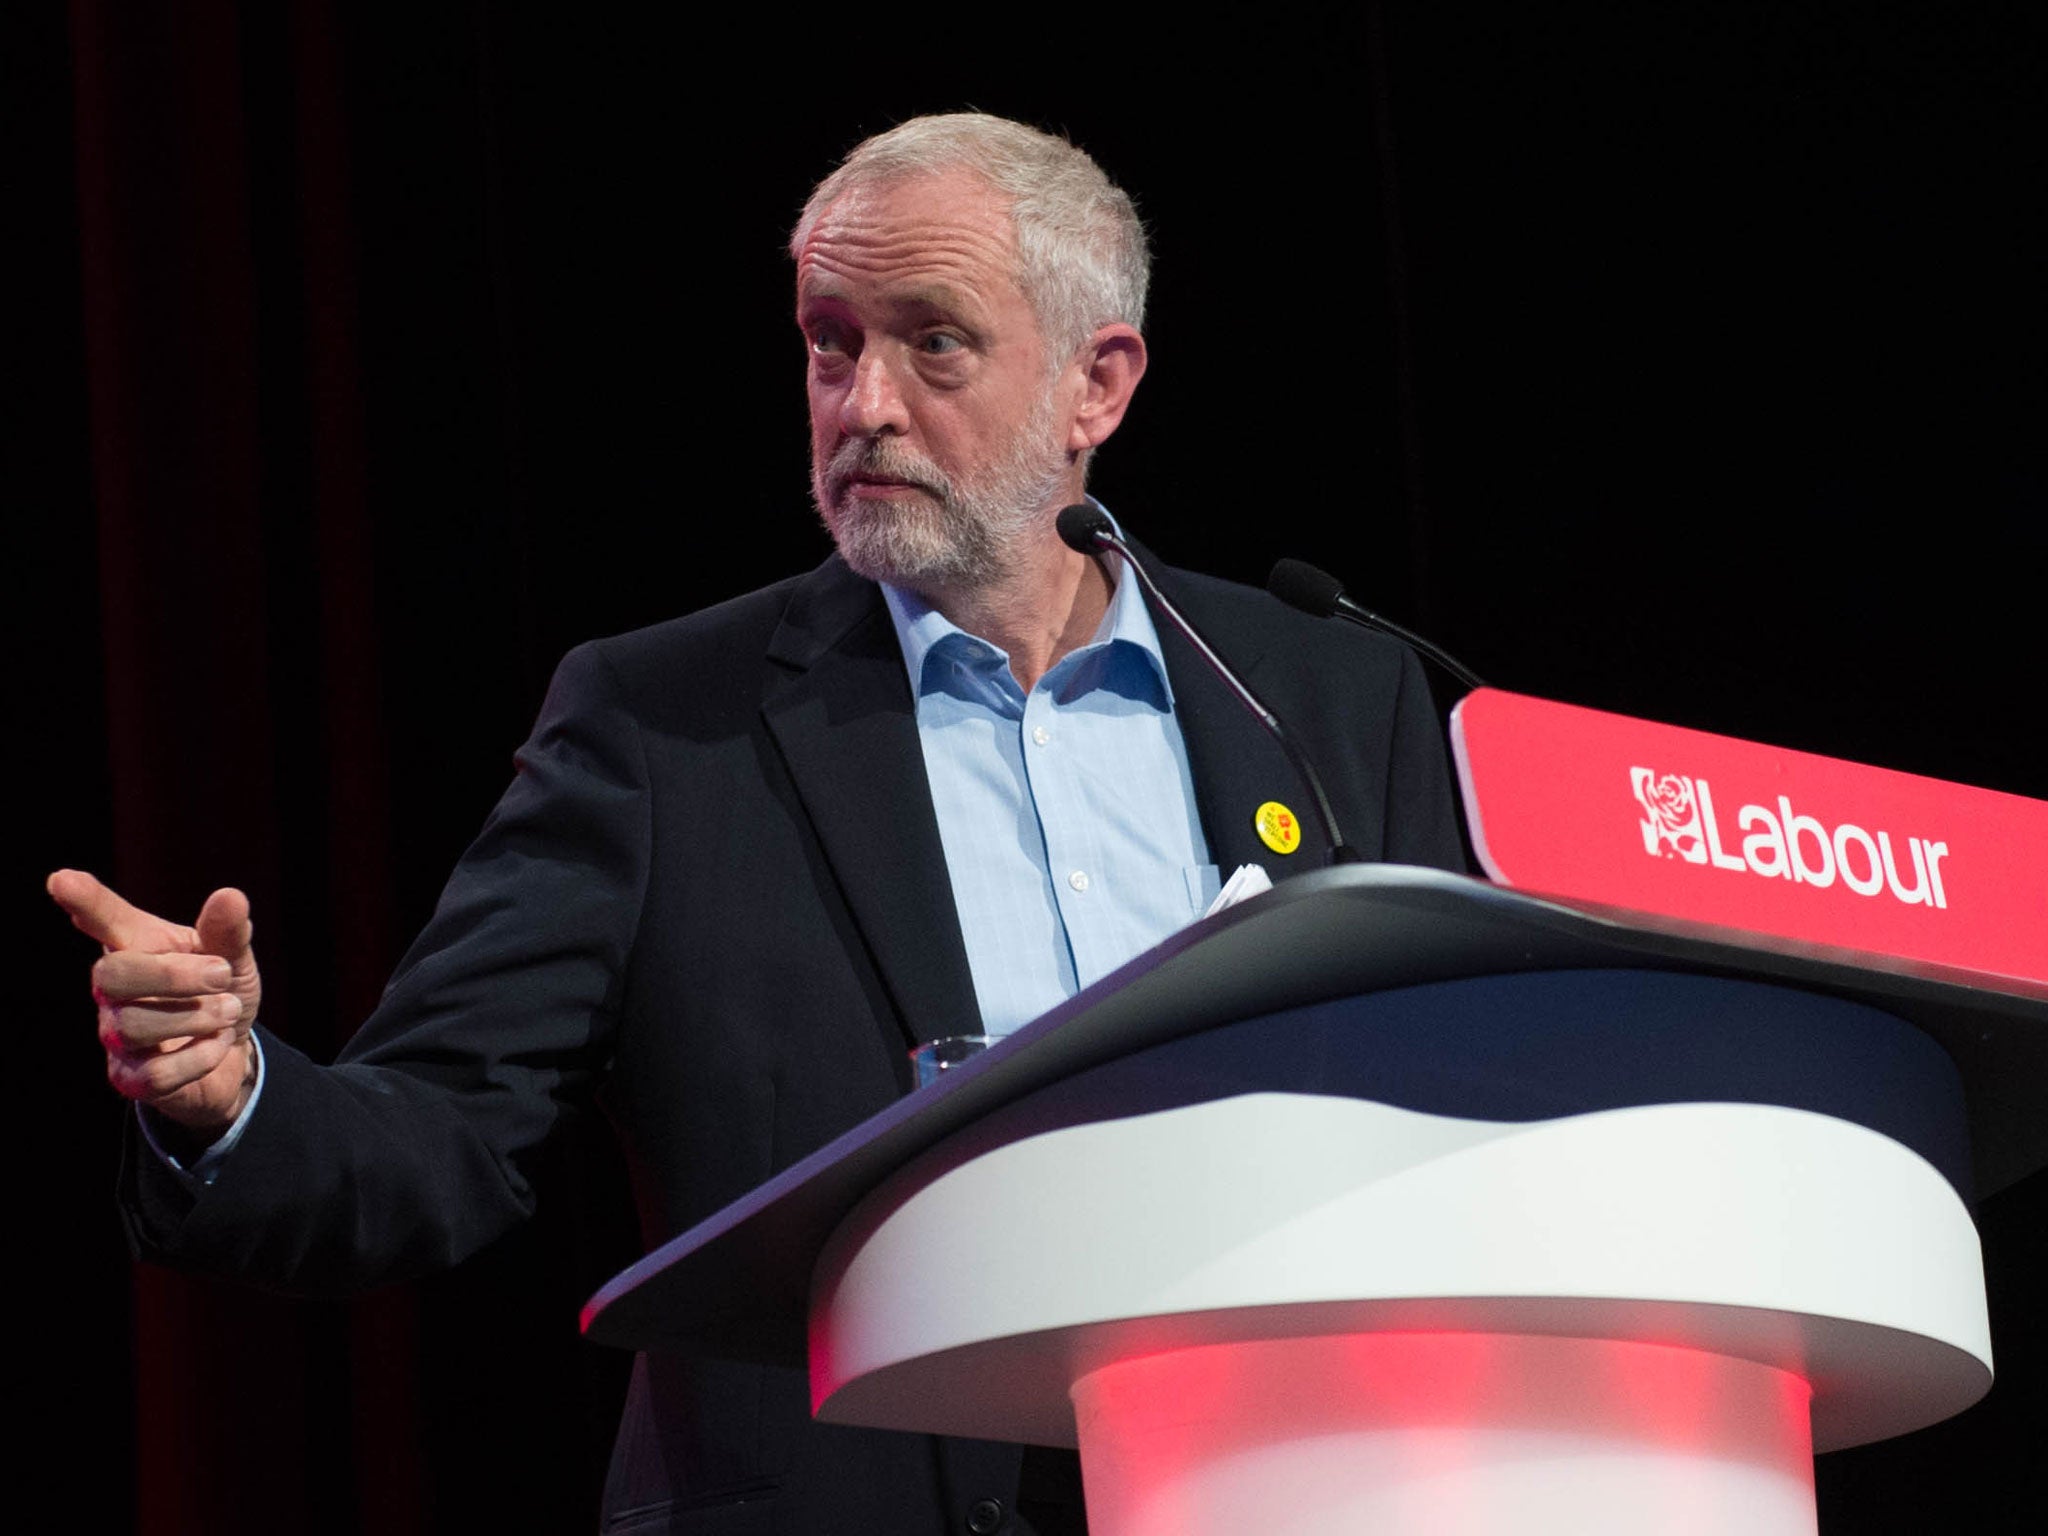 Mr Corbyn gained much of his support from the north of England plus the Midlands and Wales